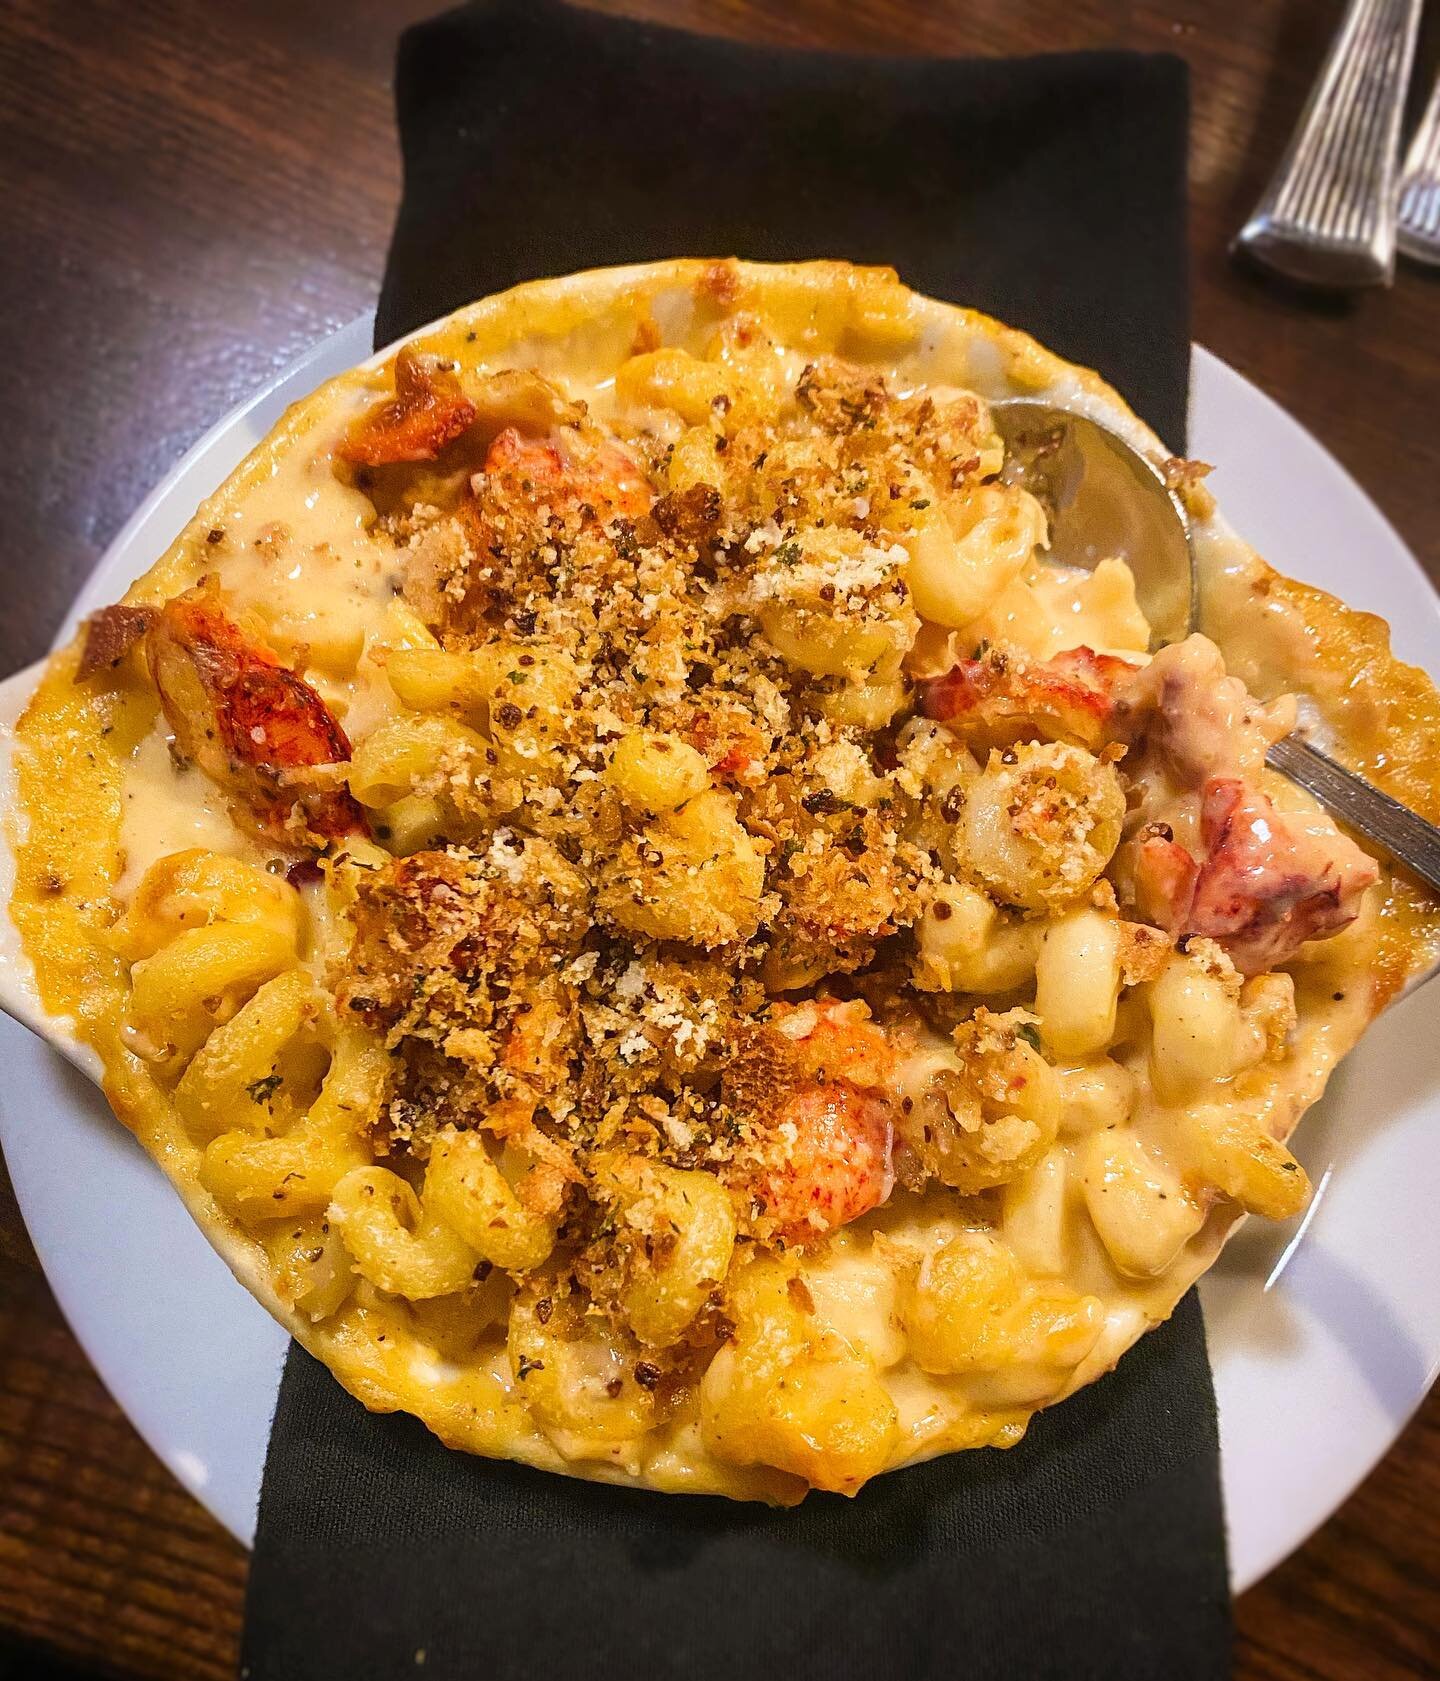 Have you tried our Lobster Mac &amp; Cheese?🦞

This featured entree is house-made with a blend of cheddar and smoky Gouda cheeses and tender lobster meat!

Call 309-694-0946 or visit jonahsseafood.com to reserve your table!

#jonahsseafoodinc #eatlo